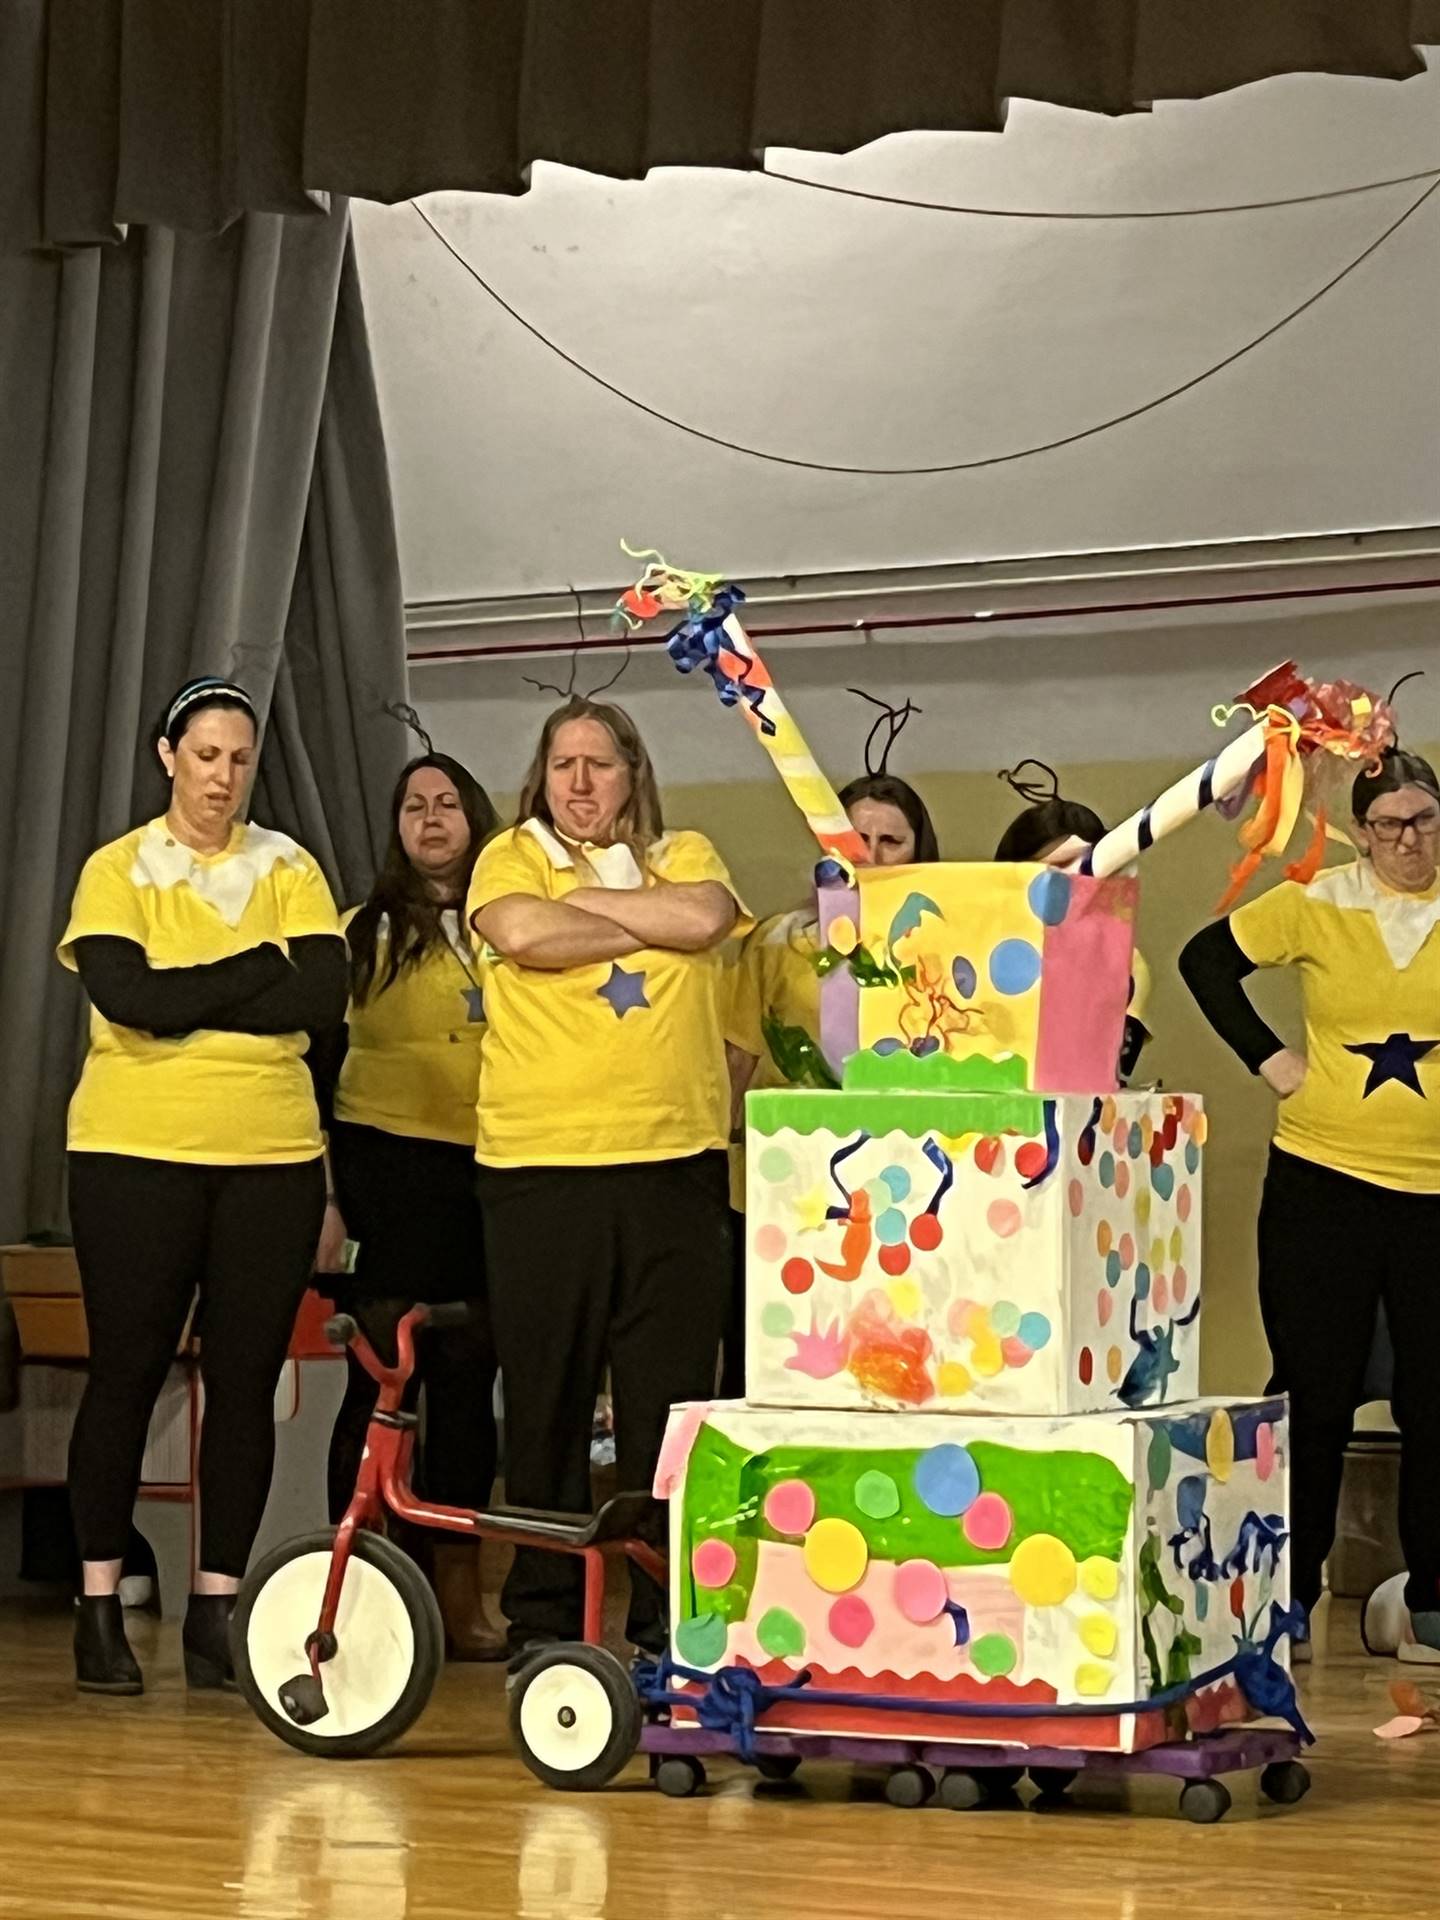 Teachers dressed in yellow shirts and arms crossed behind a brightly colored machine